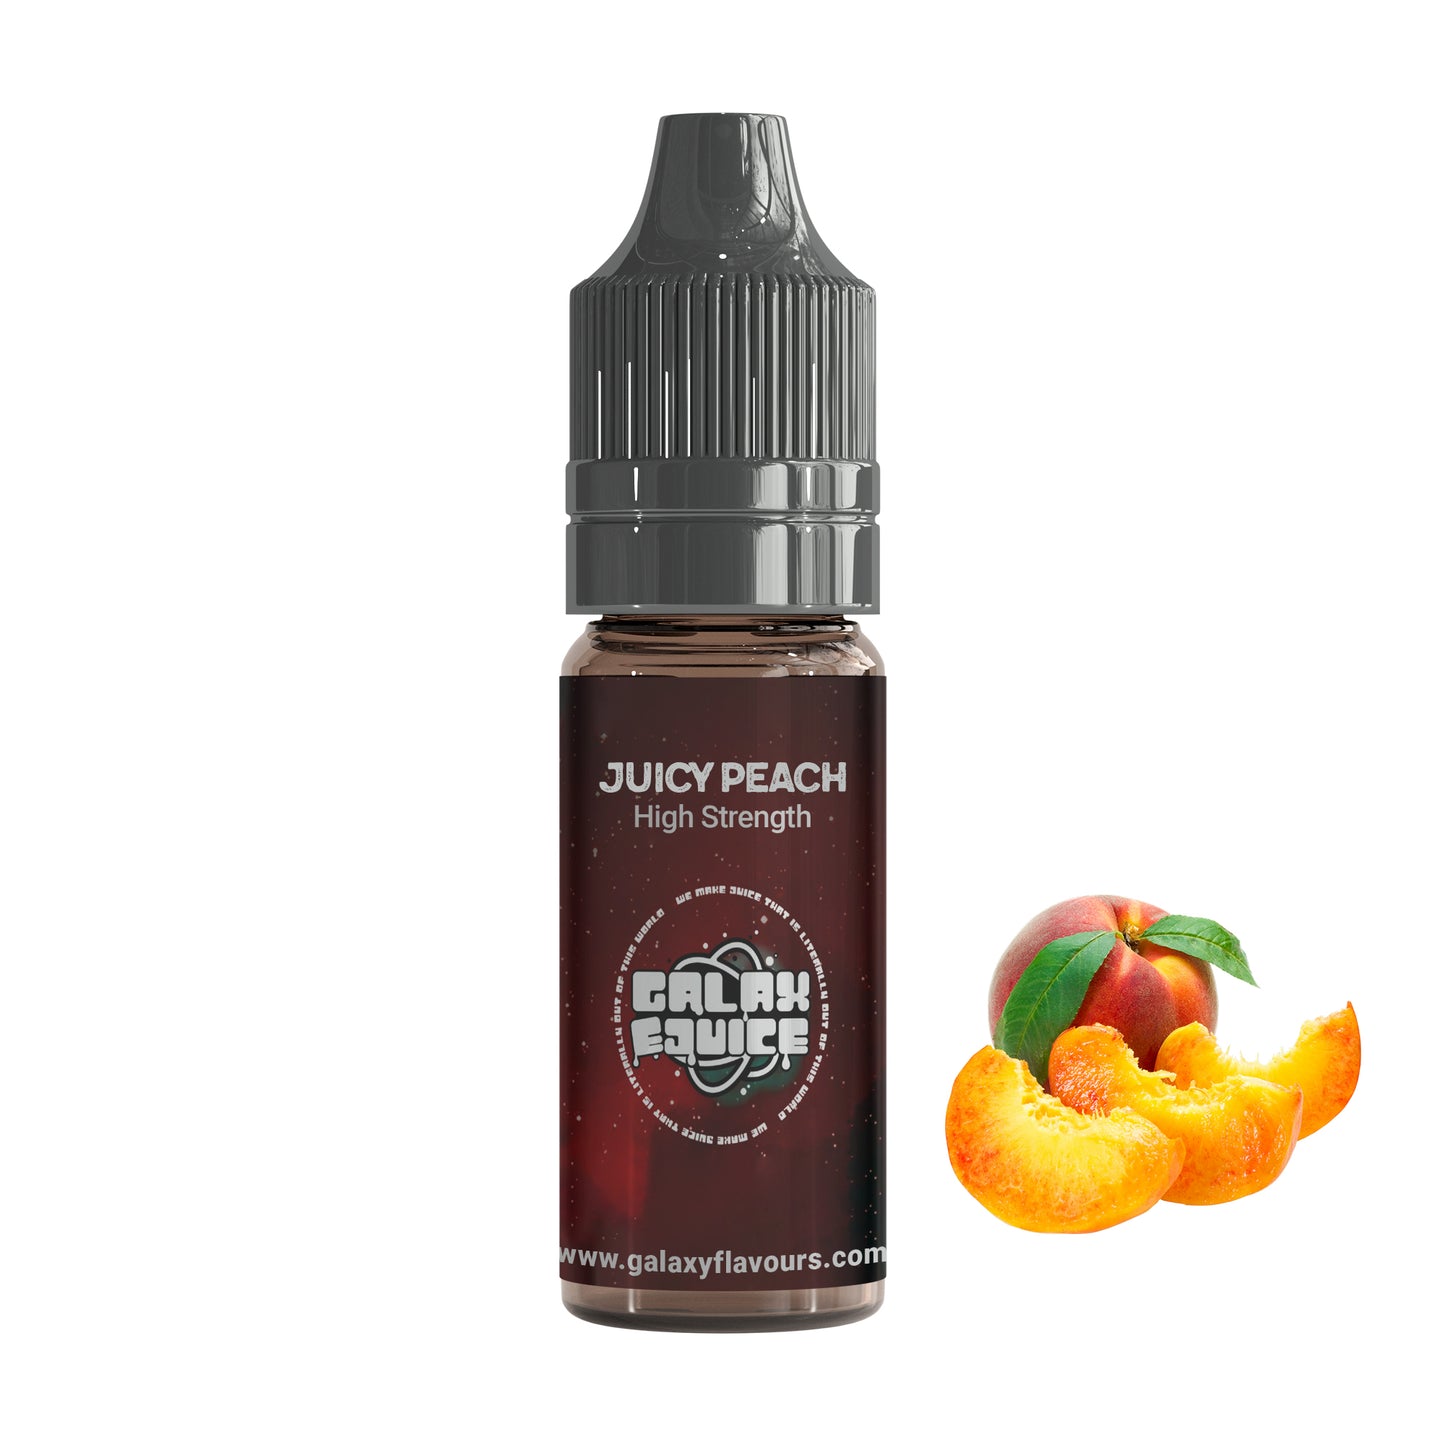 Juicy Peach High Strength Professional Flavouring.